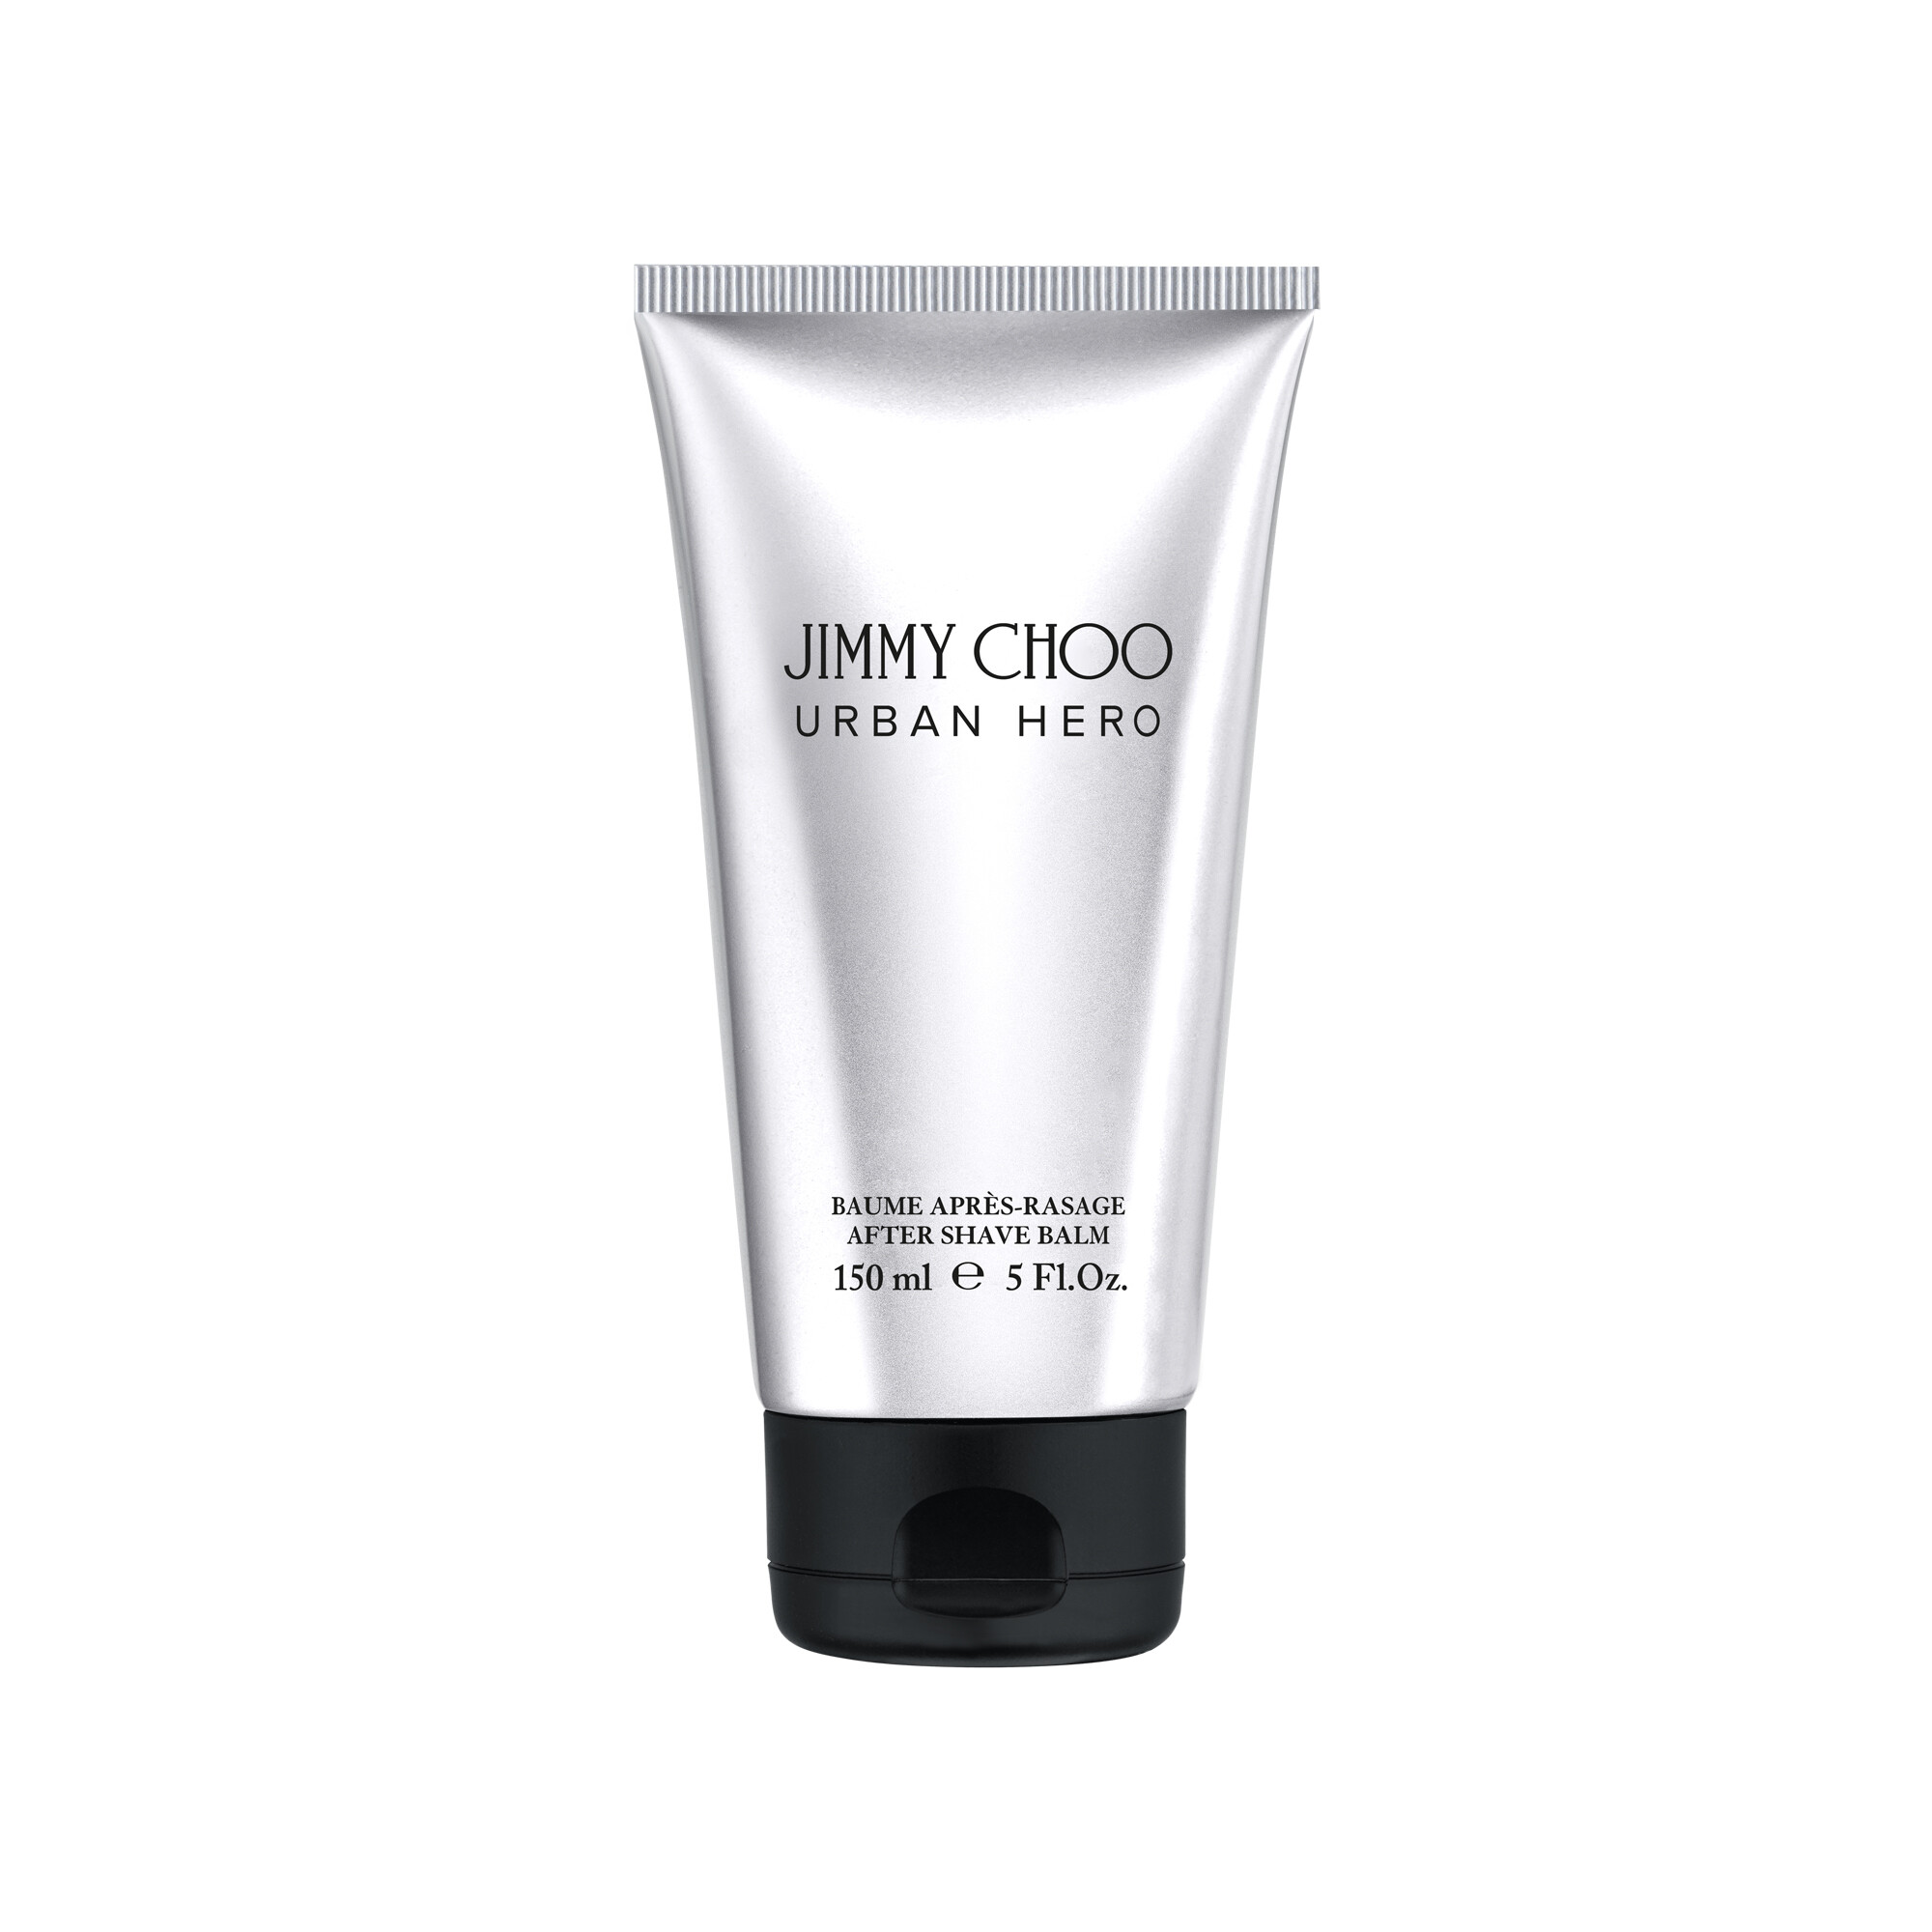 Jimmy Choo Urban Hero After Shave Balm